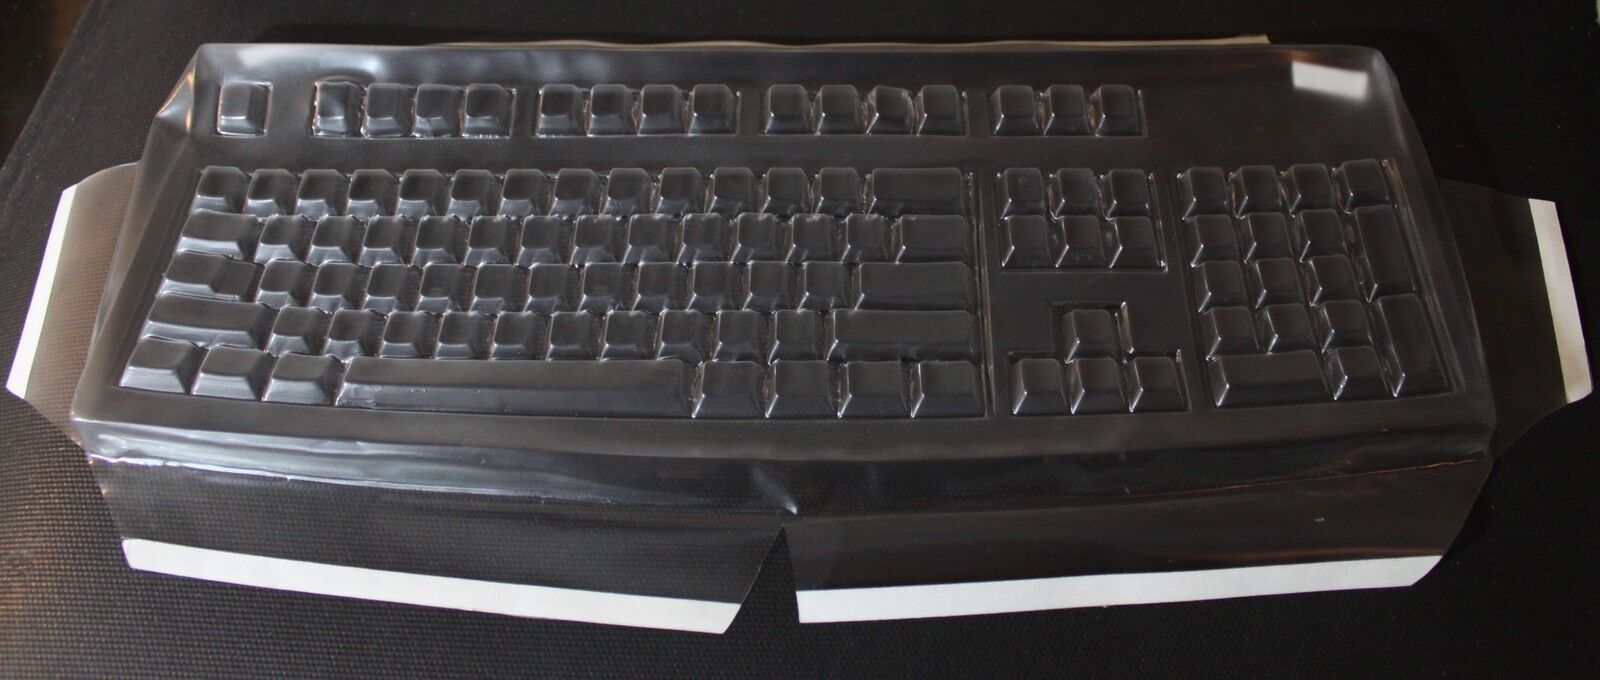 Keybord Cover for Cherry RS 6000 - G83-6164  - 123D104 Keyboard Not Included